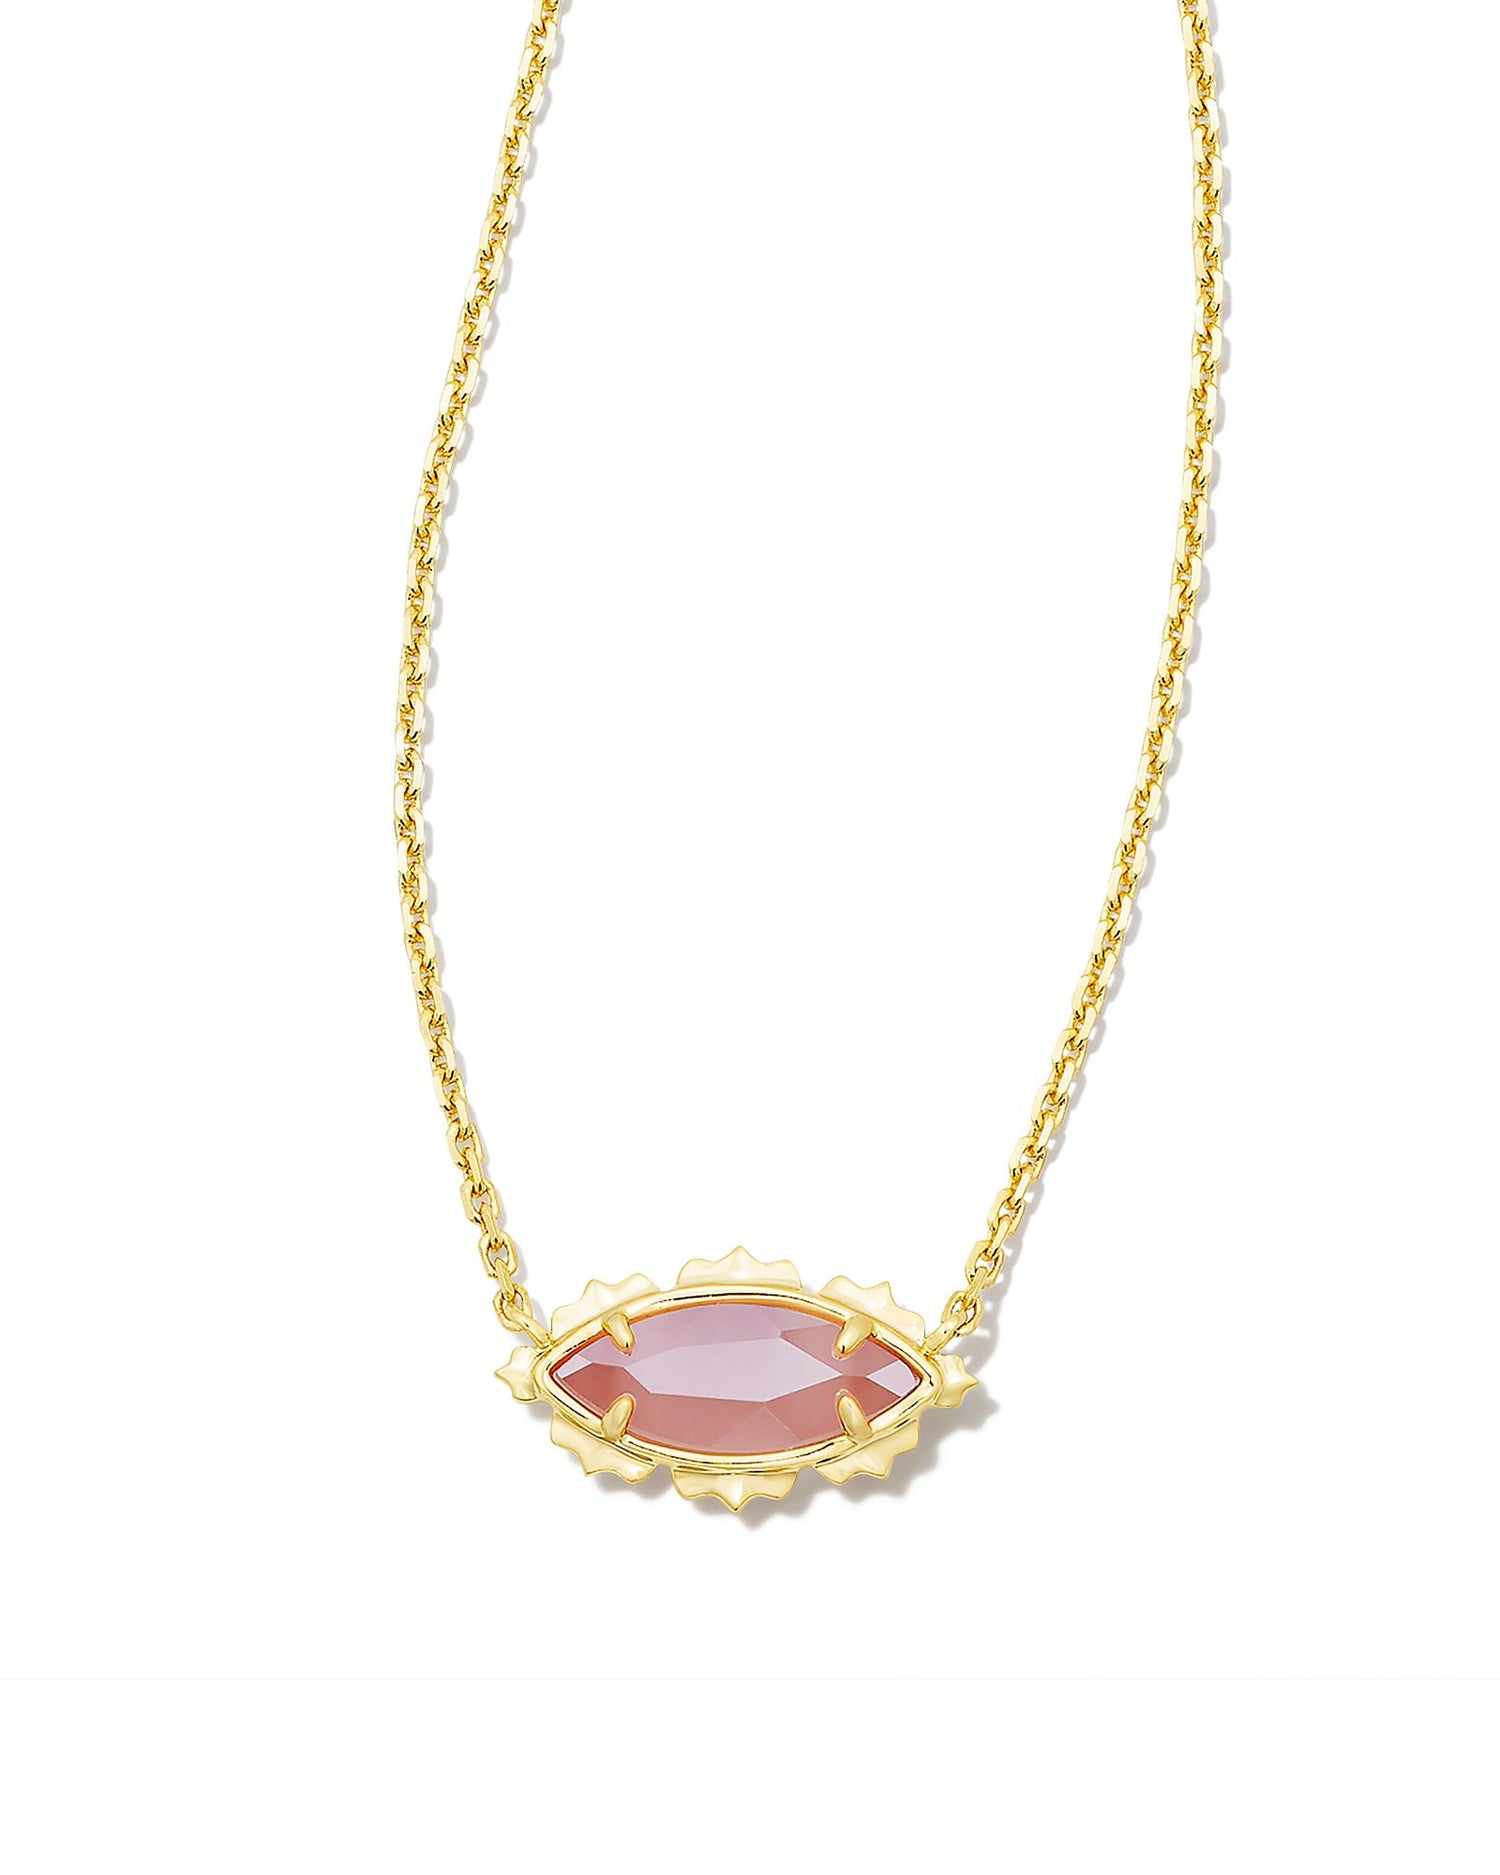 Timeless with a touch of sparkle, the Genevieve Gold Short Pendant Necklace is sure to be your newest everyday essential. Perfect as a standalone piece or an elegant addition to a layered look, this marquise-shaped pendant adds a bit of shine to any occasion.  Dimensions- 16' CHAIN WITH 3' EXTENDER, 0.34'Lx0.6"W PENDENT Metal- 14K Gold plated over brass Closure- Lobster clasp w/ single adjustable slider bead Rose color